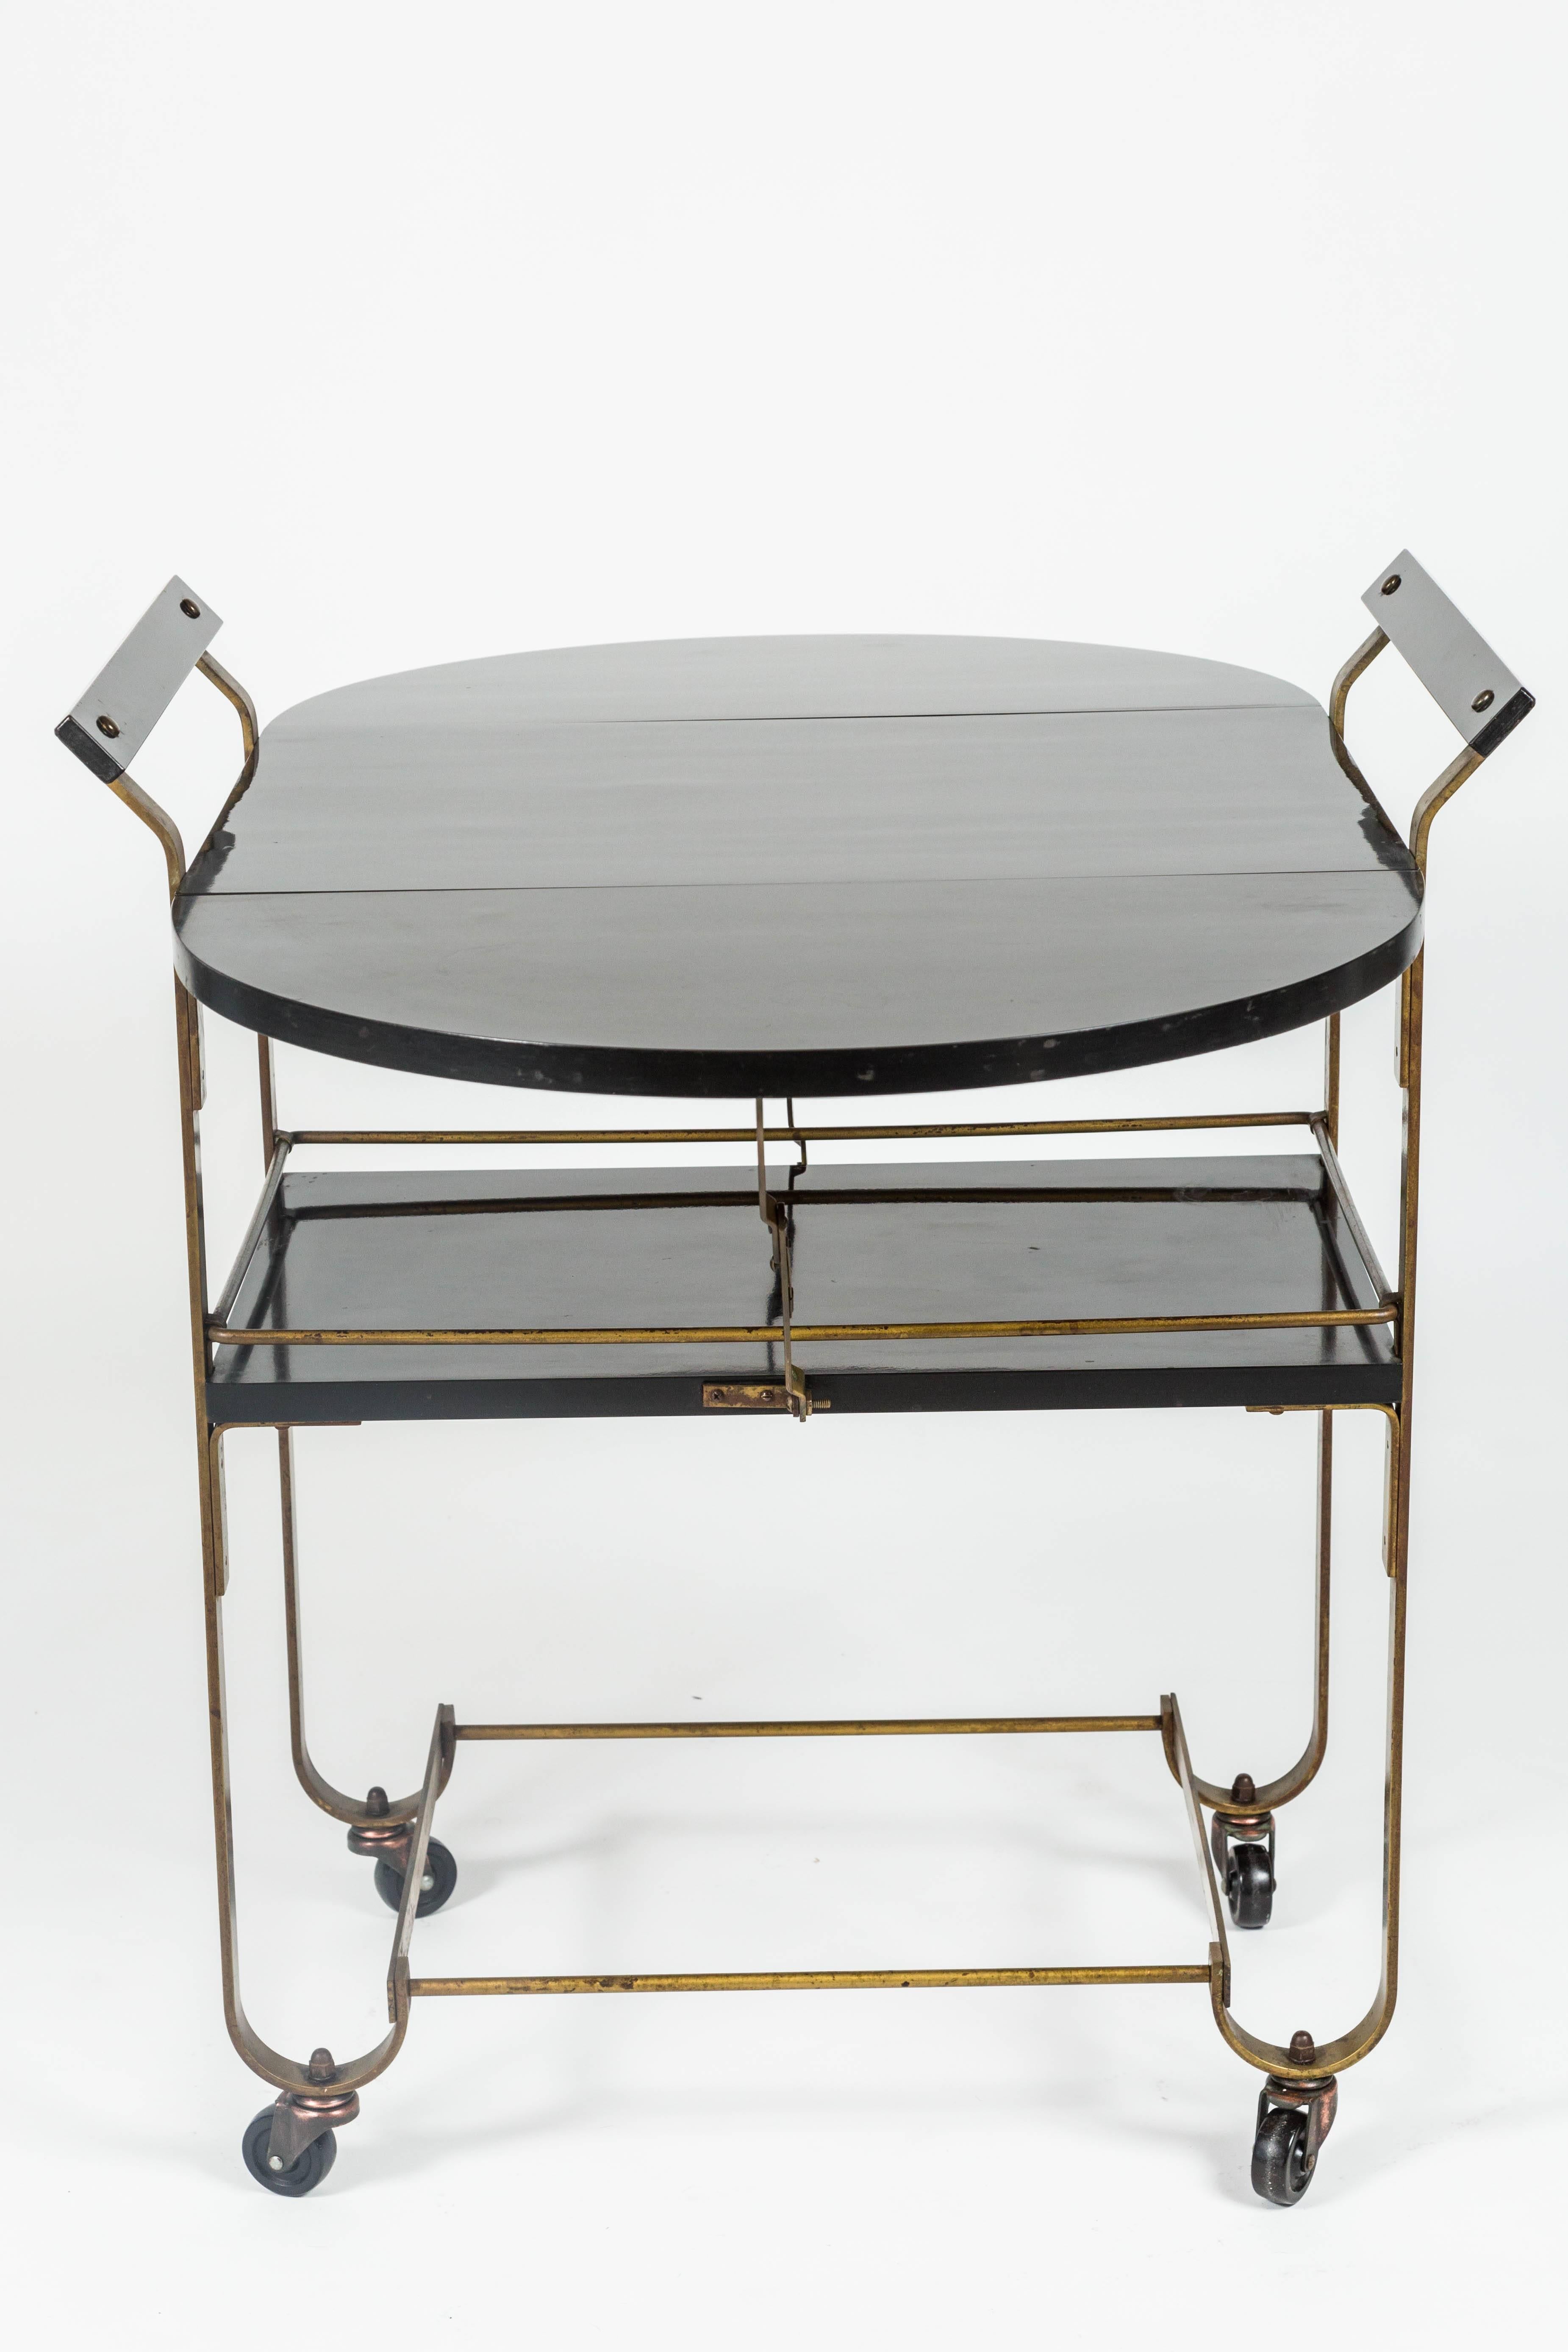 Stylish Art Deco Black and Gold Drinks Trolley 1